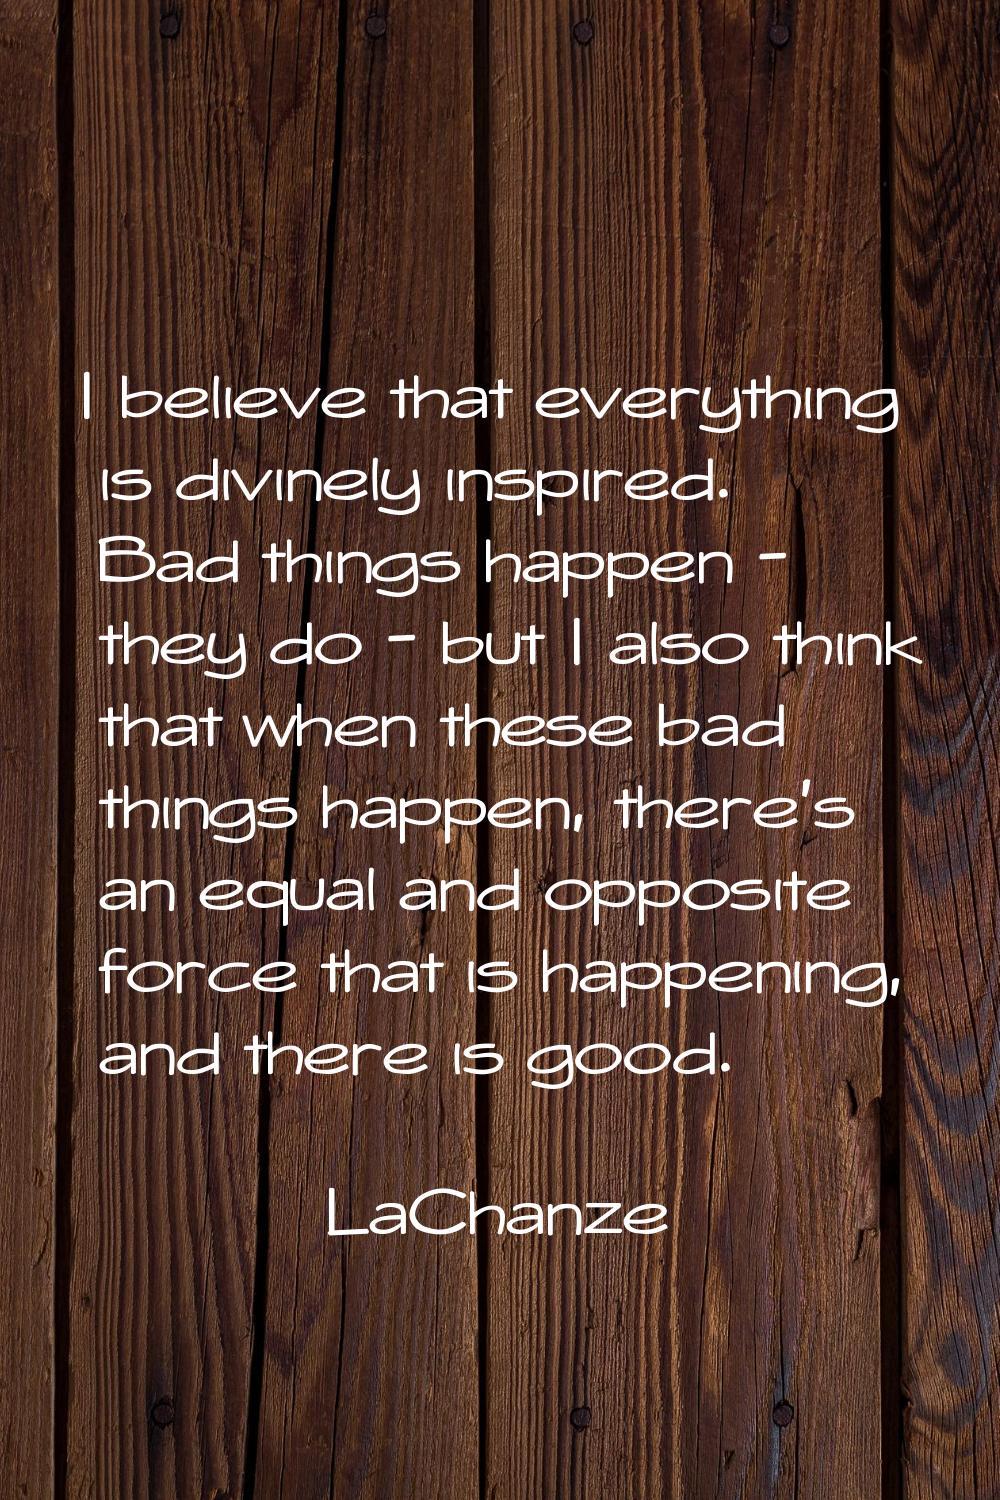 I believe that everything is divinely inspired. Bad things happen - they do - but I also think that